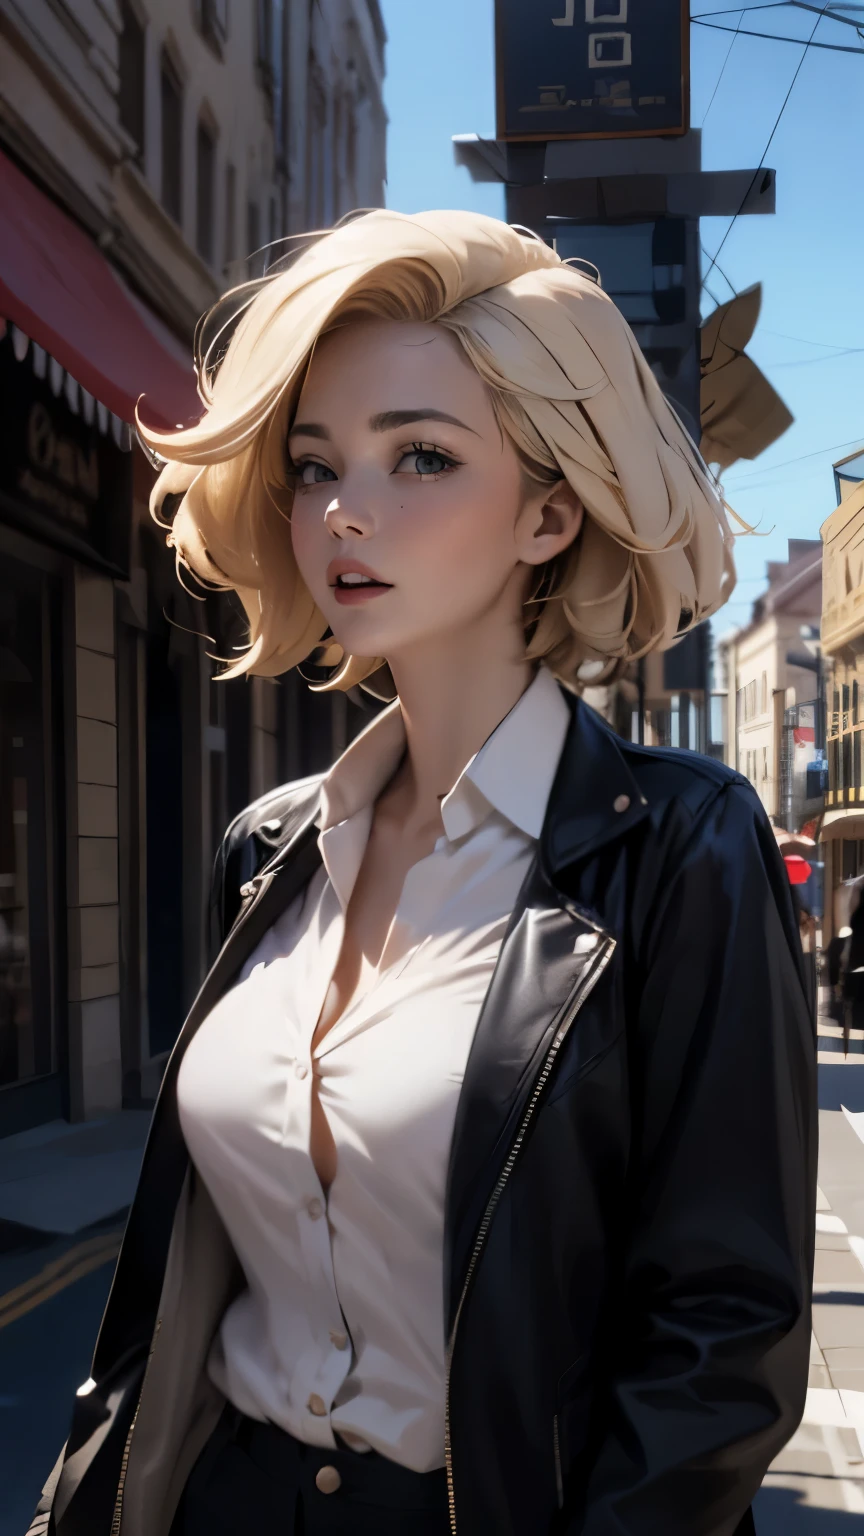 a westerner woman looks at the sky, windy, light colored hair, round face, smile, downtown area, unbuttoned shirt, (swollen areolas), casual clothes, jacket,